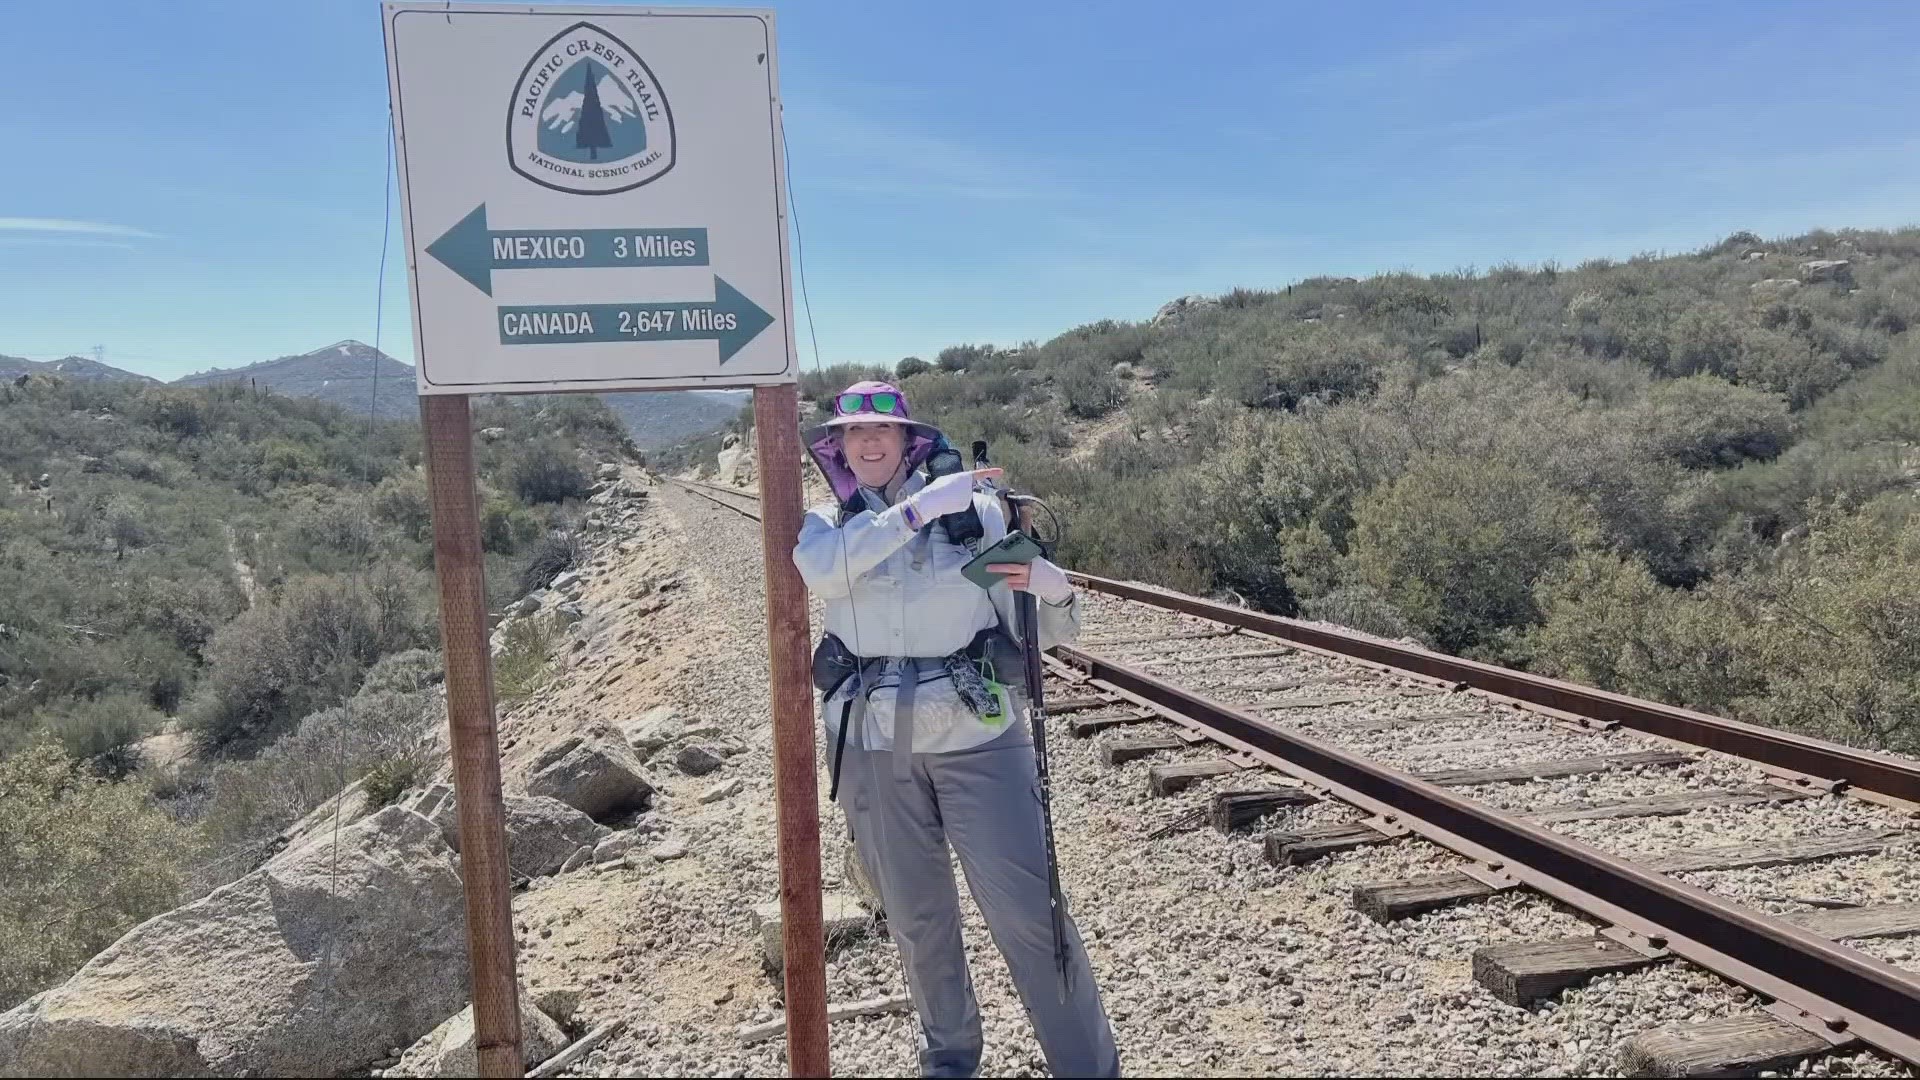 After going through four rounds of chemo and beating Hodgkin’s Lymphoma, Shawn is setting out to conquer the 2,600-mile hike this year.